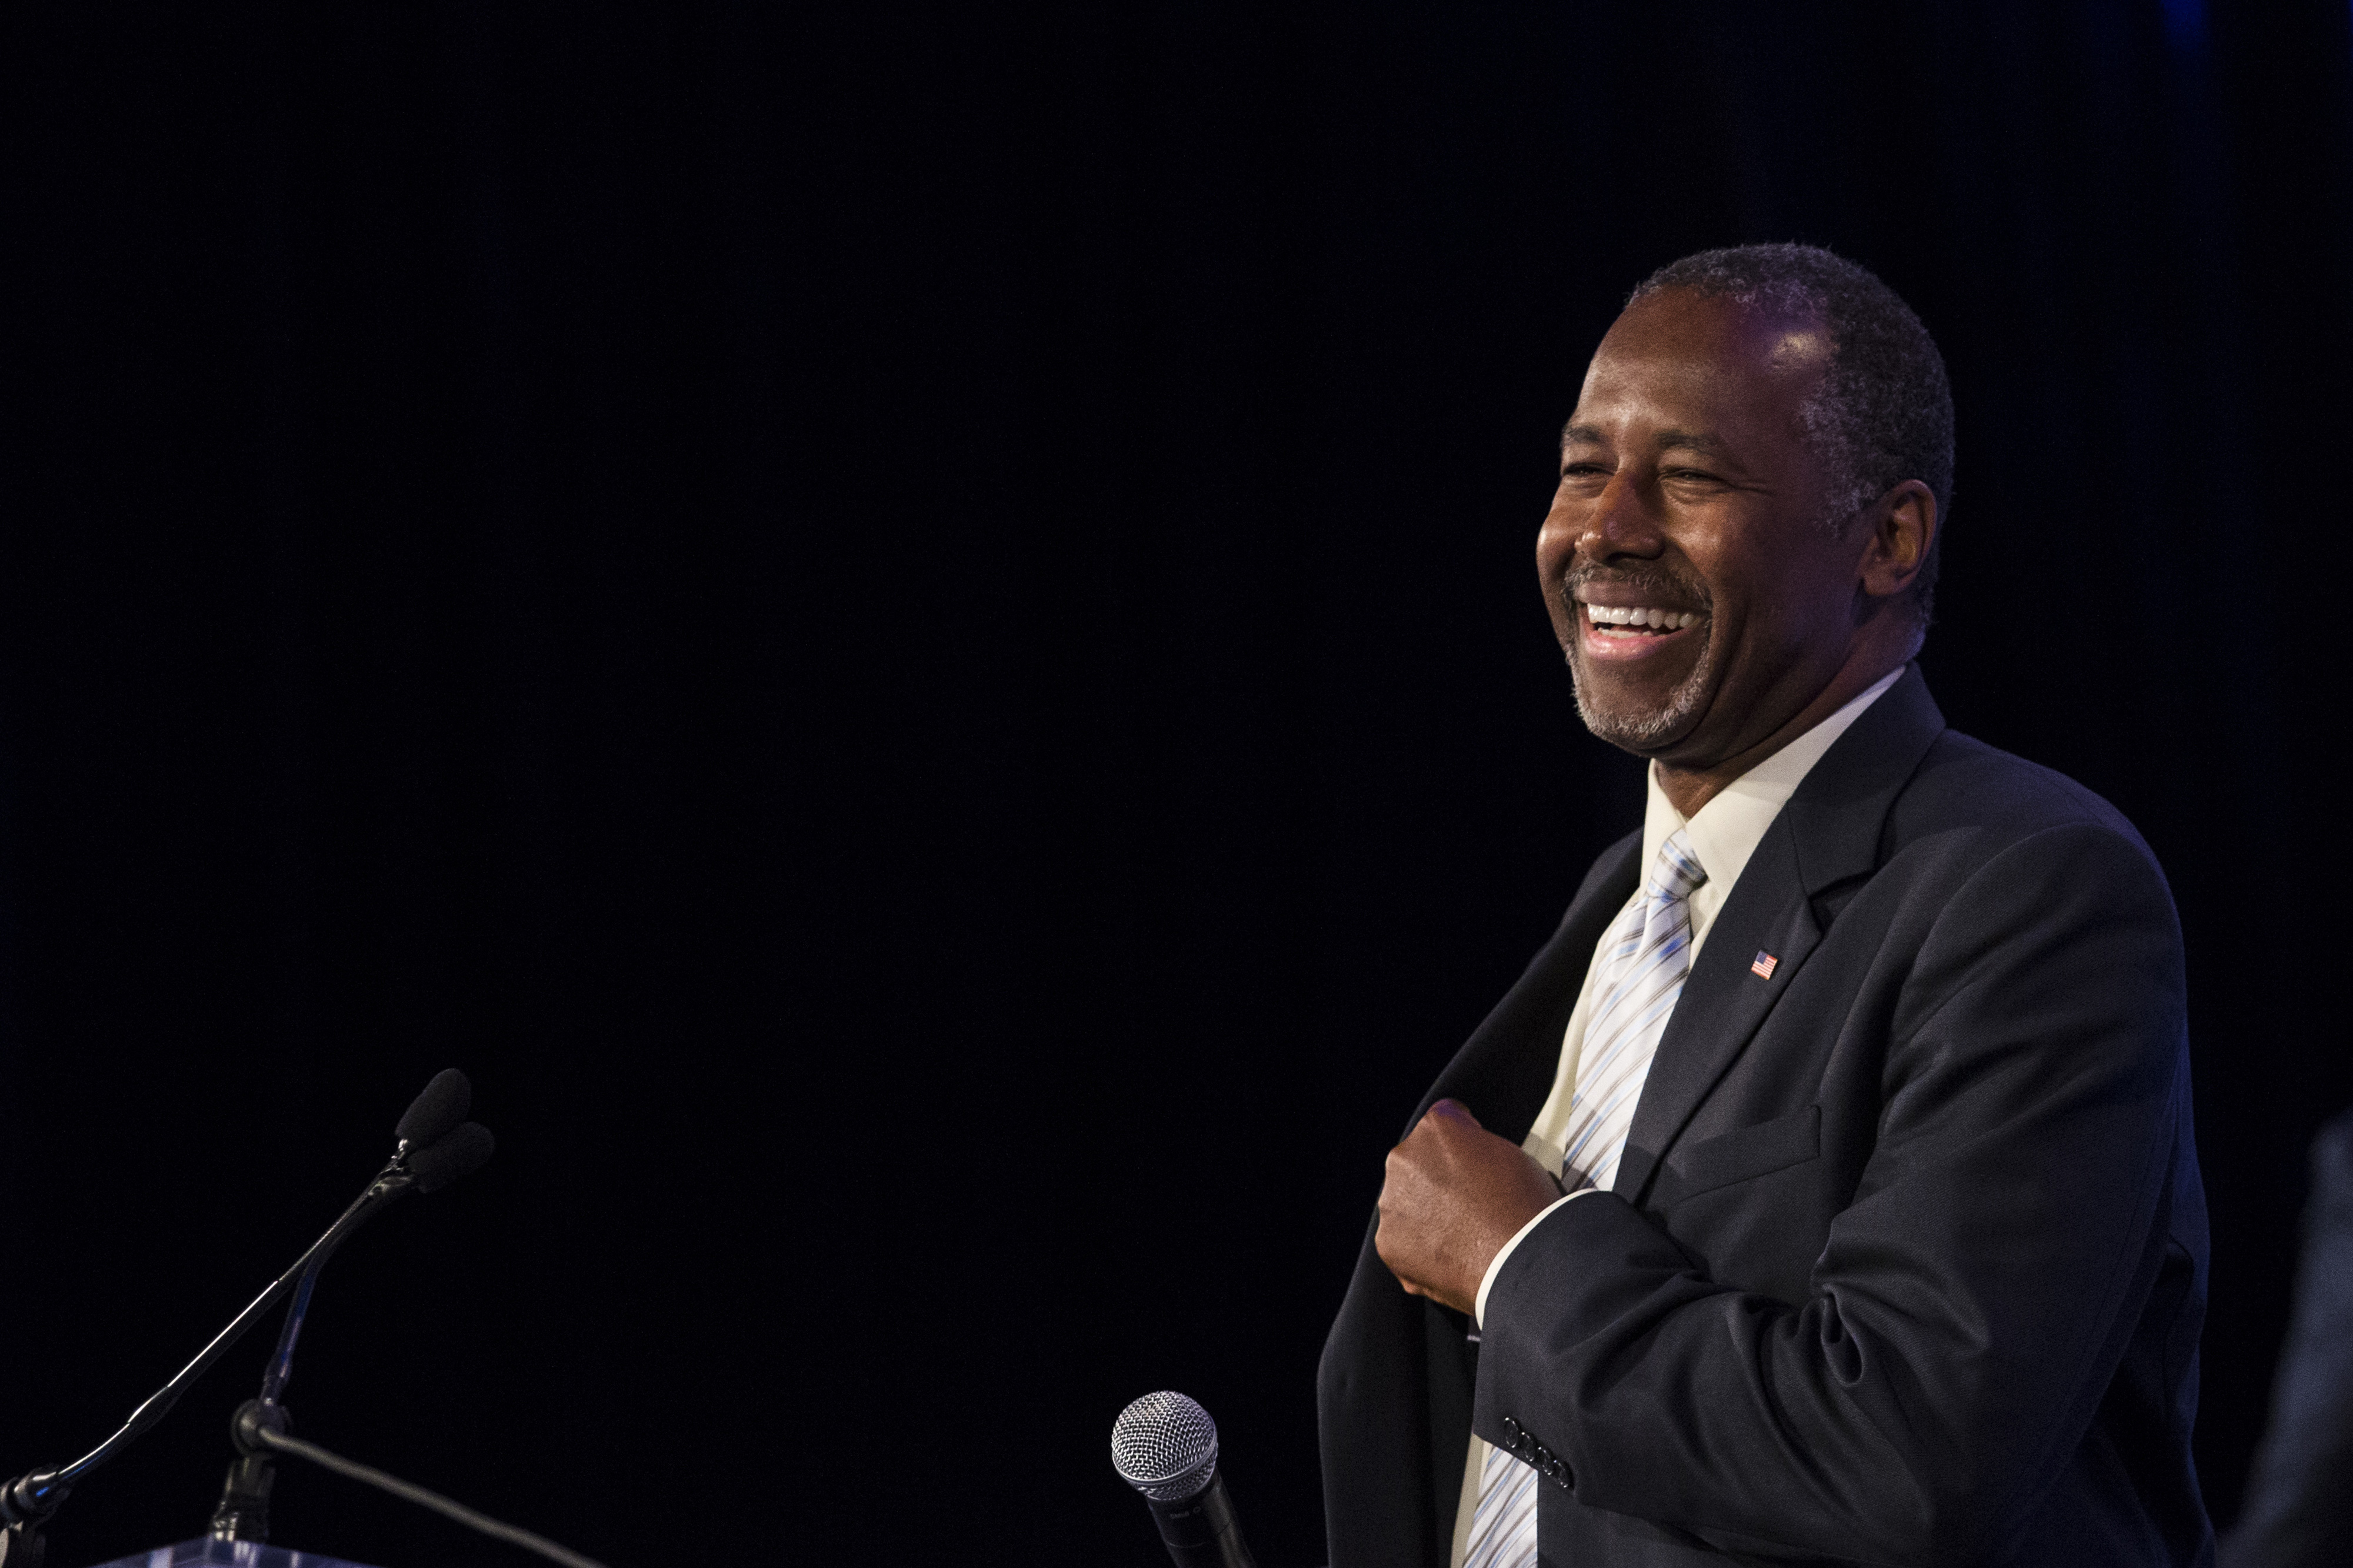 Ben Carson, 2016 Republican presidential candidate, smiles while arriving onstage to speak during the Values Voter Summit on Sept. 25, 2015 in Washington, D.C.